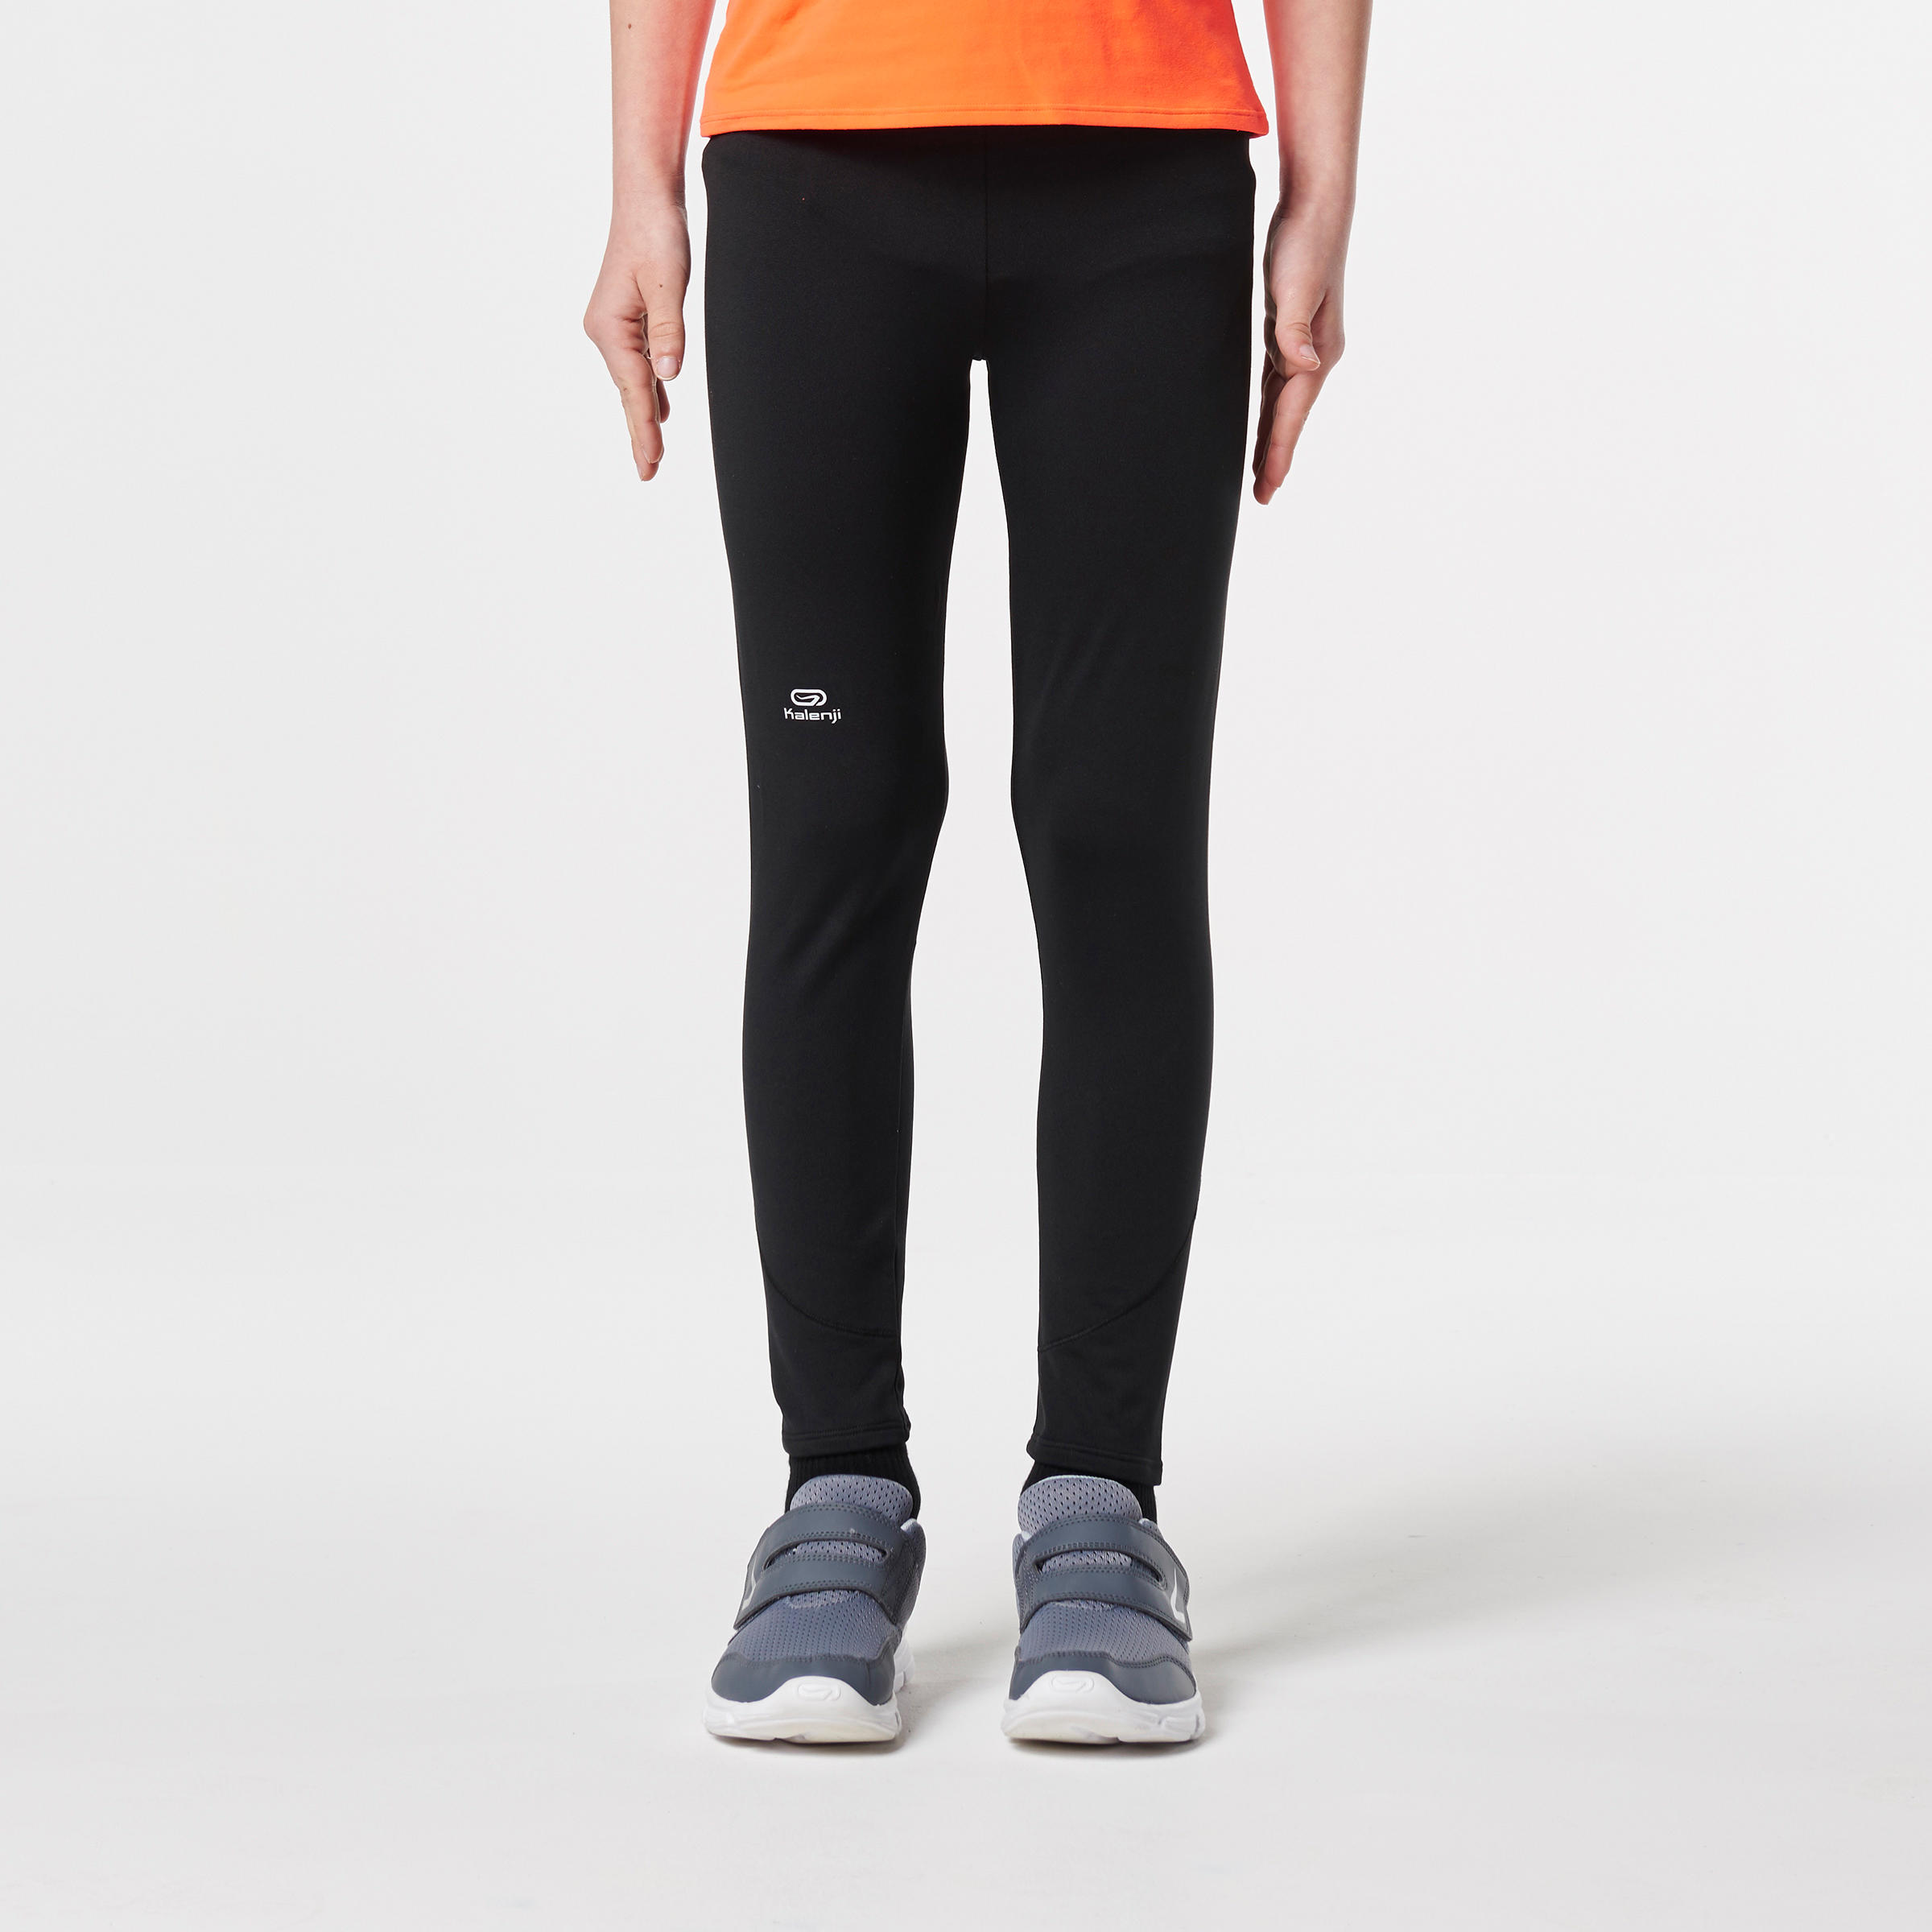 The North Face Winter Warm Tight - Running tights Men's, Product Review